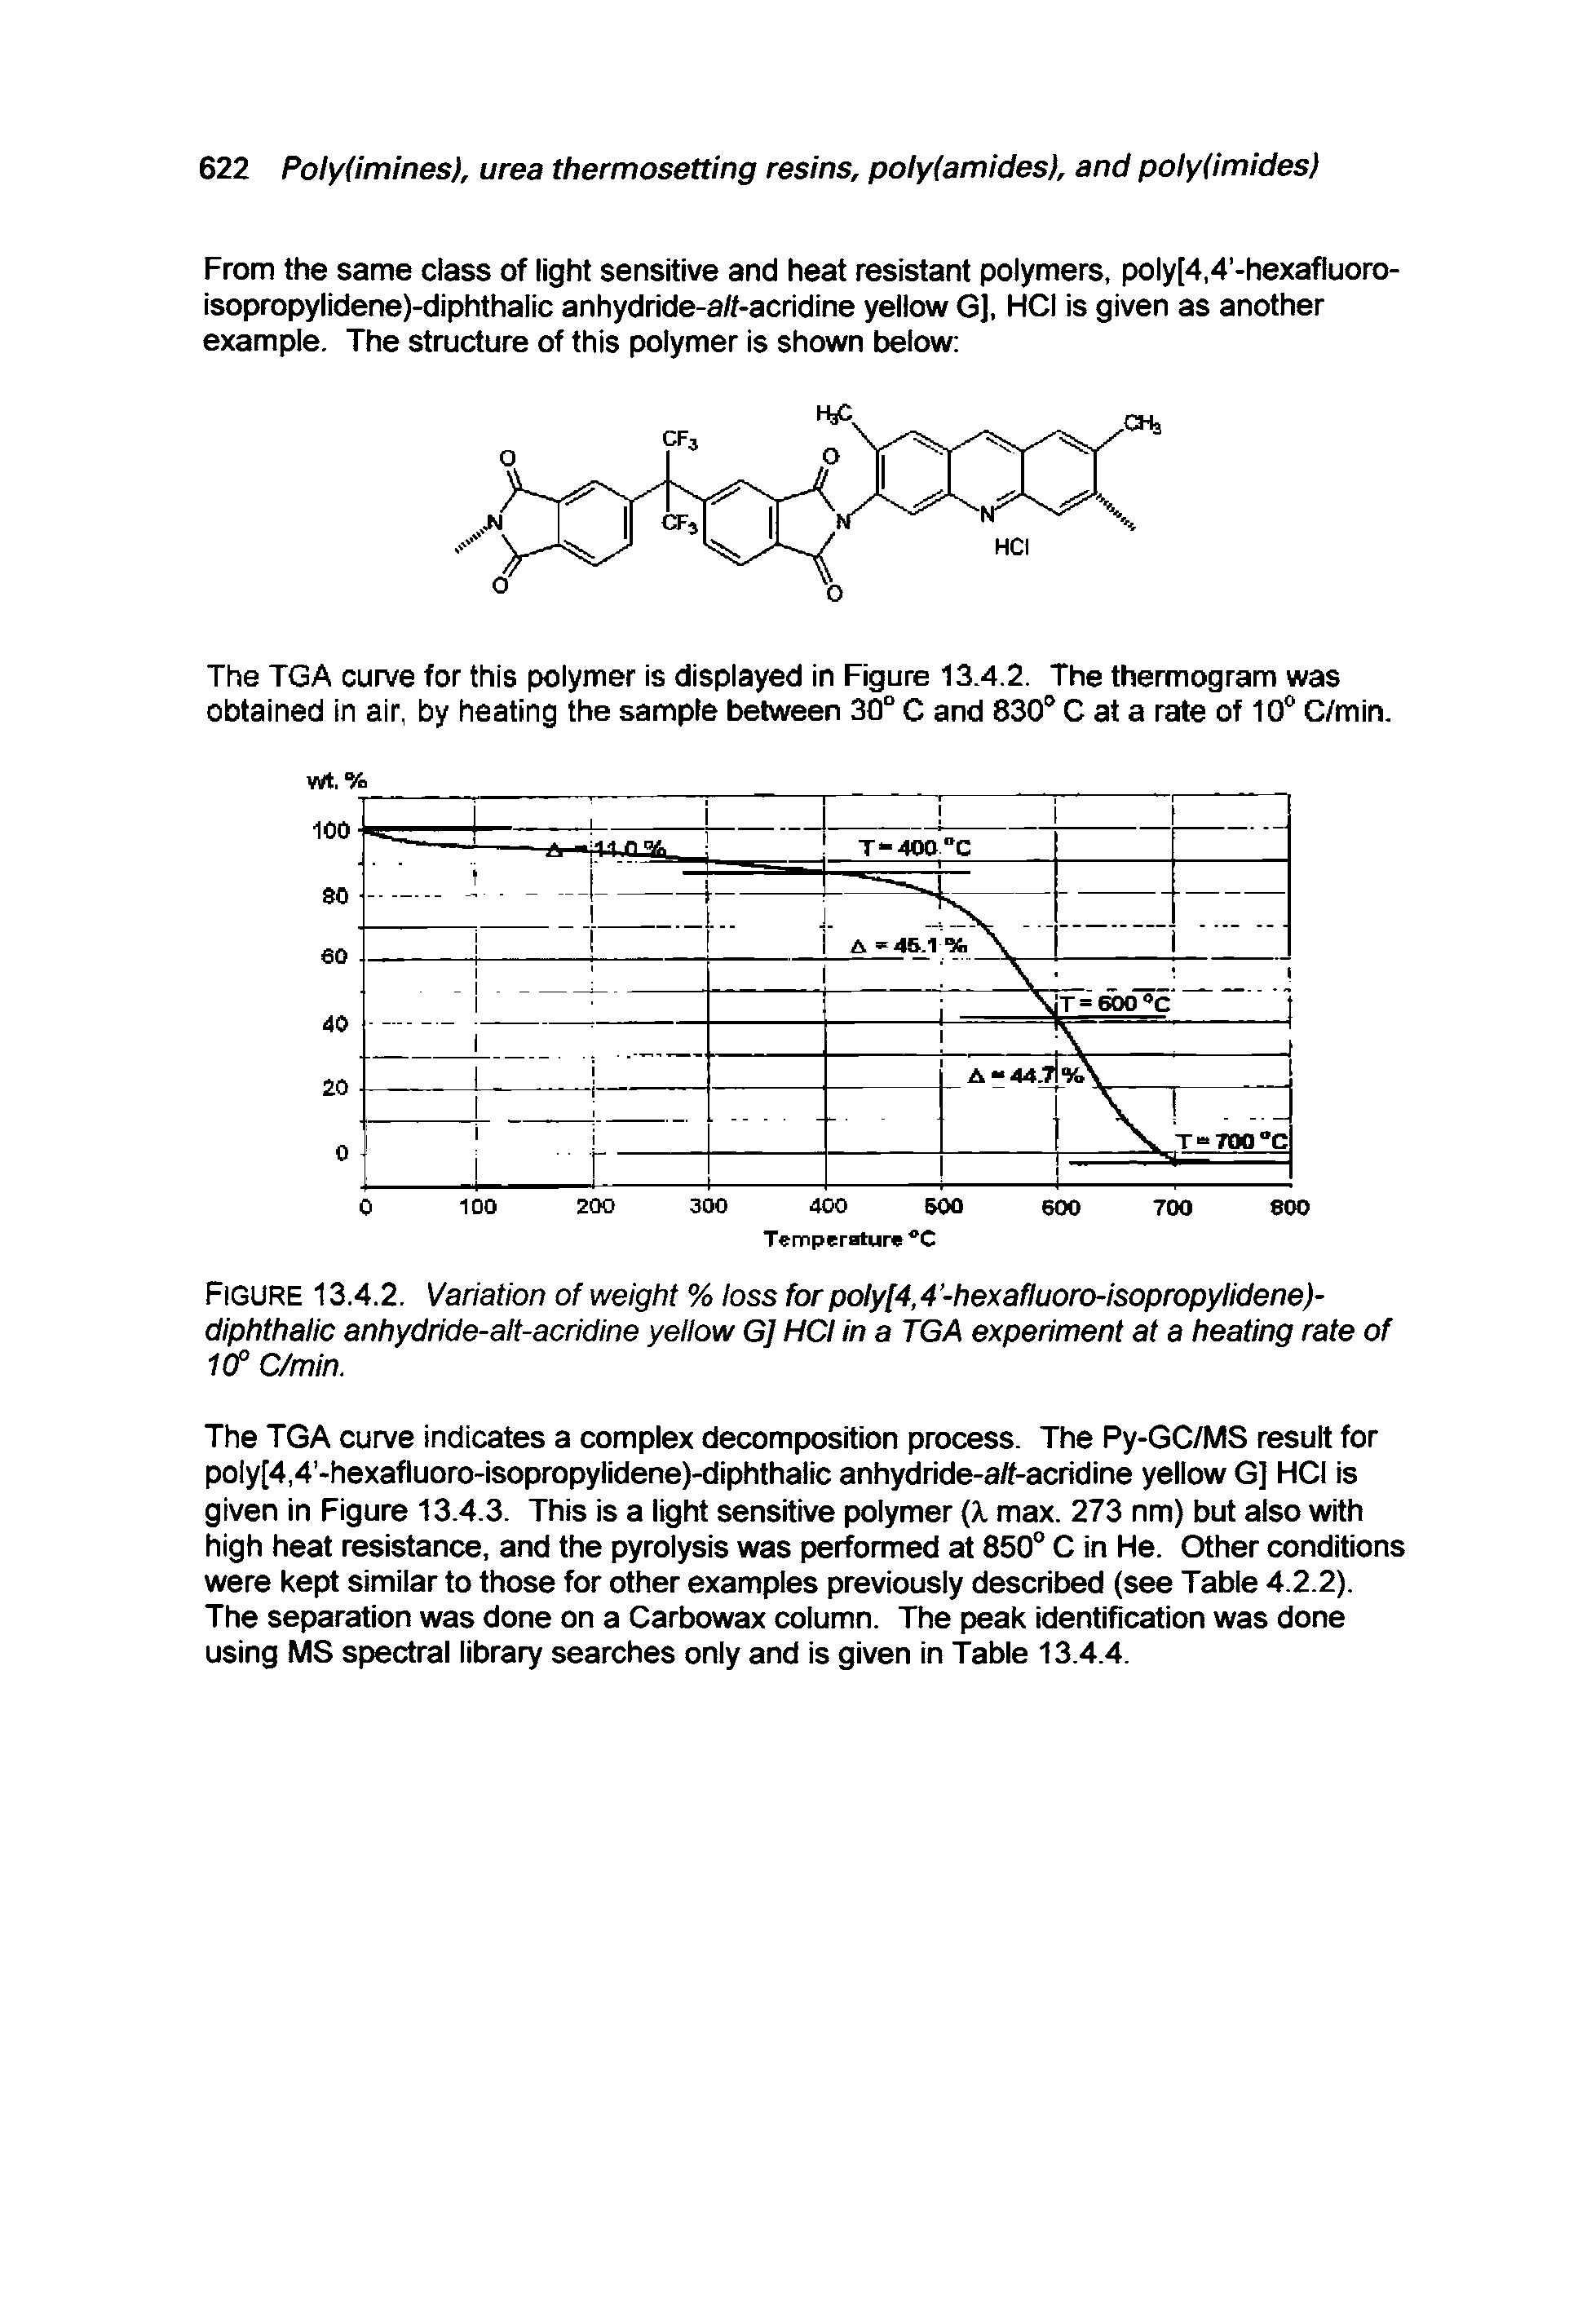 Figure 13.4.2. Variation of weight % loss forpoly[4,4 -hexafluoro-isopropylidene)-diphthalic anhydride-alt-acridine yellow G] HCI in a TGA experiment at a heating rate of 10P C/min.